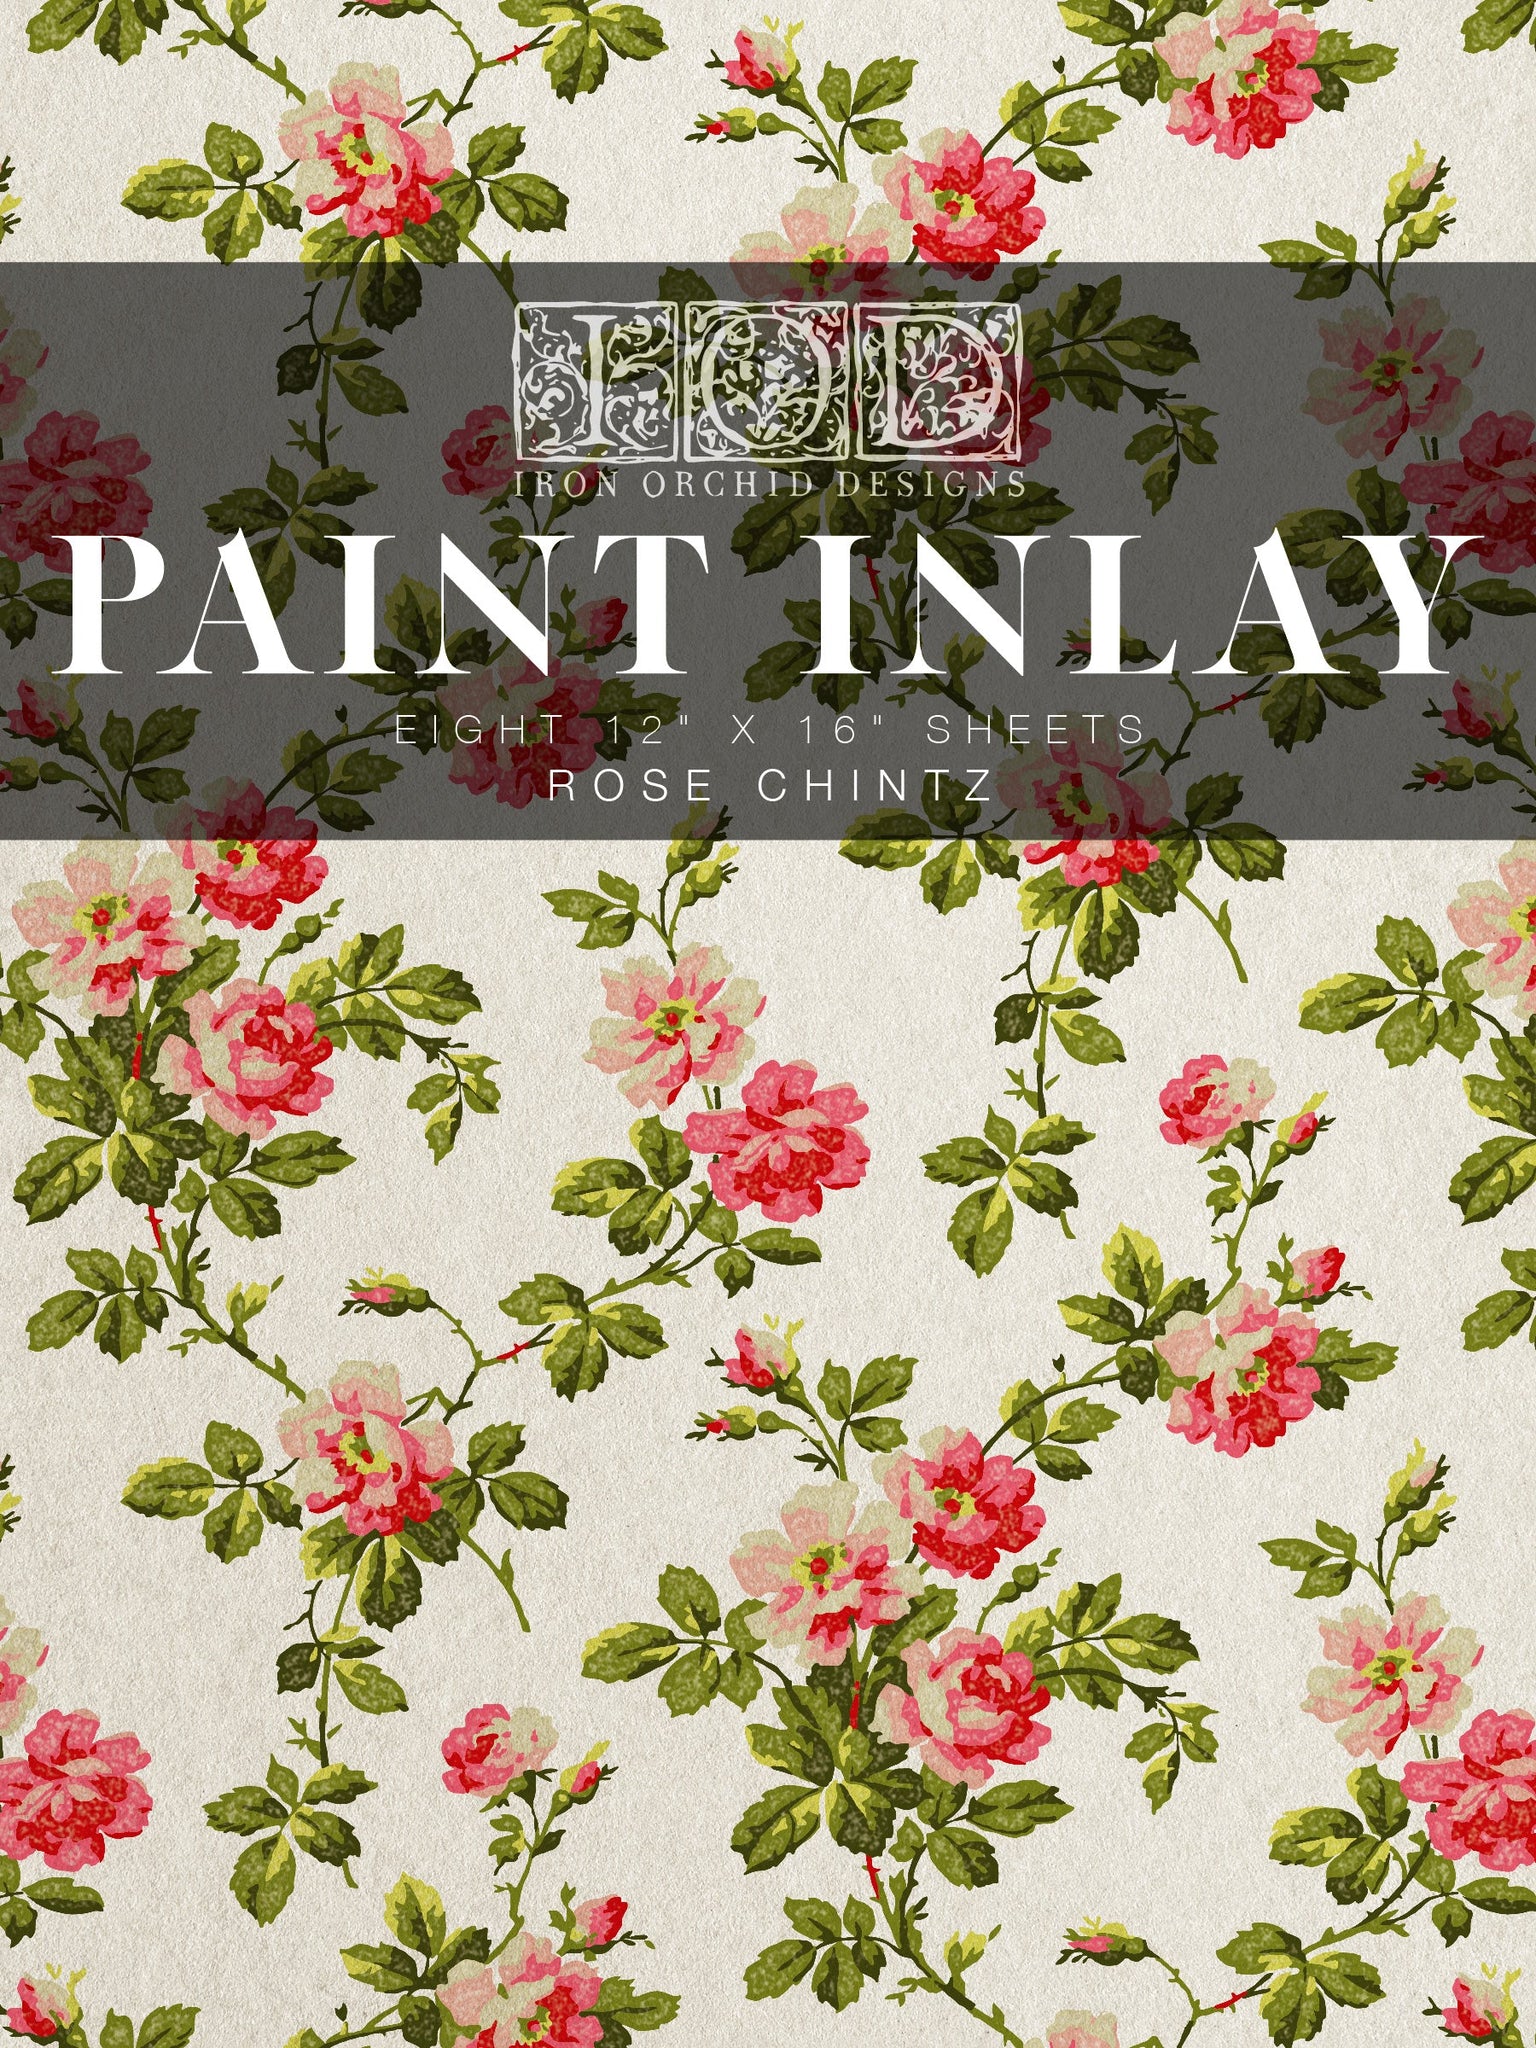 Rose Chintz Paint Inlay (pad of 8 12"x16" sheets) by IOD - Iron Orchid Designs @ Painted Heirloom